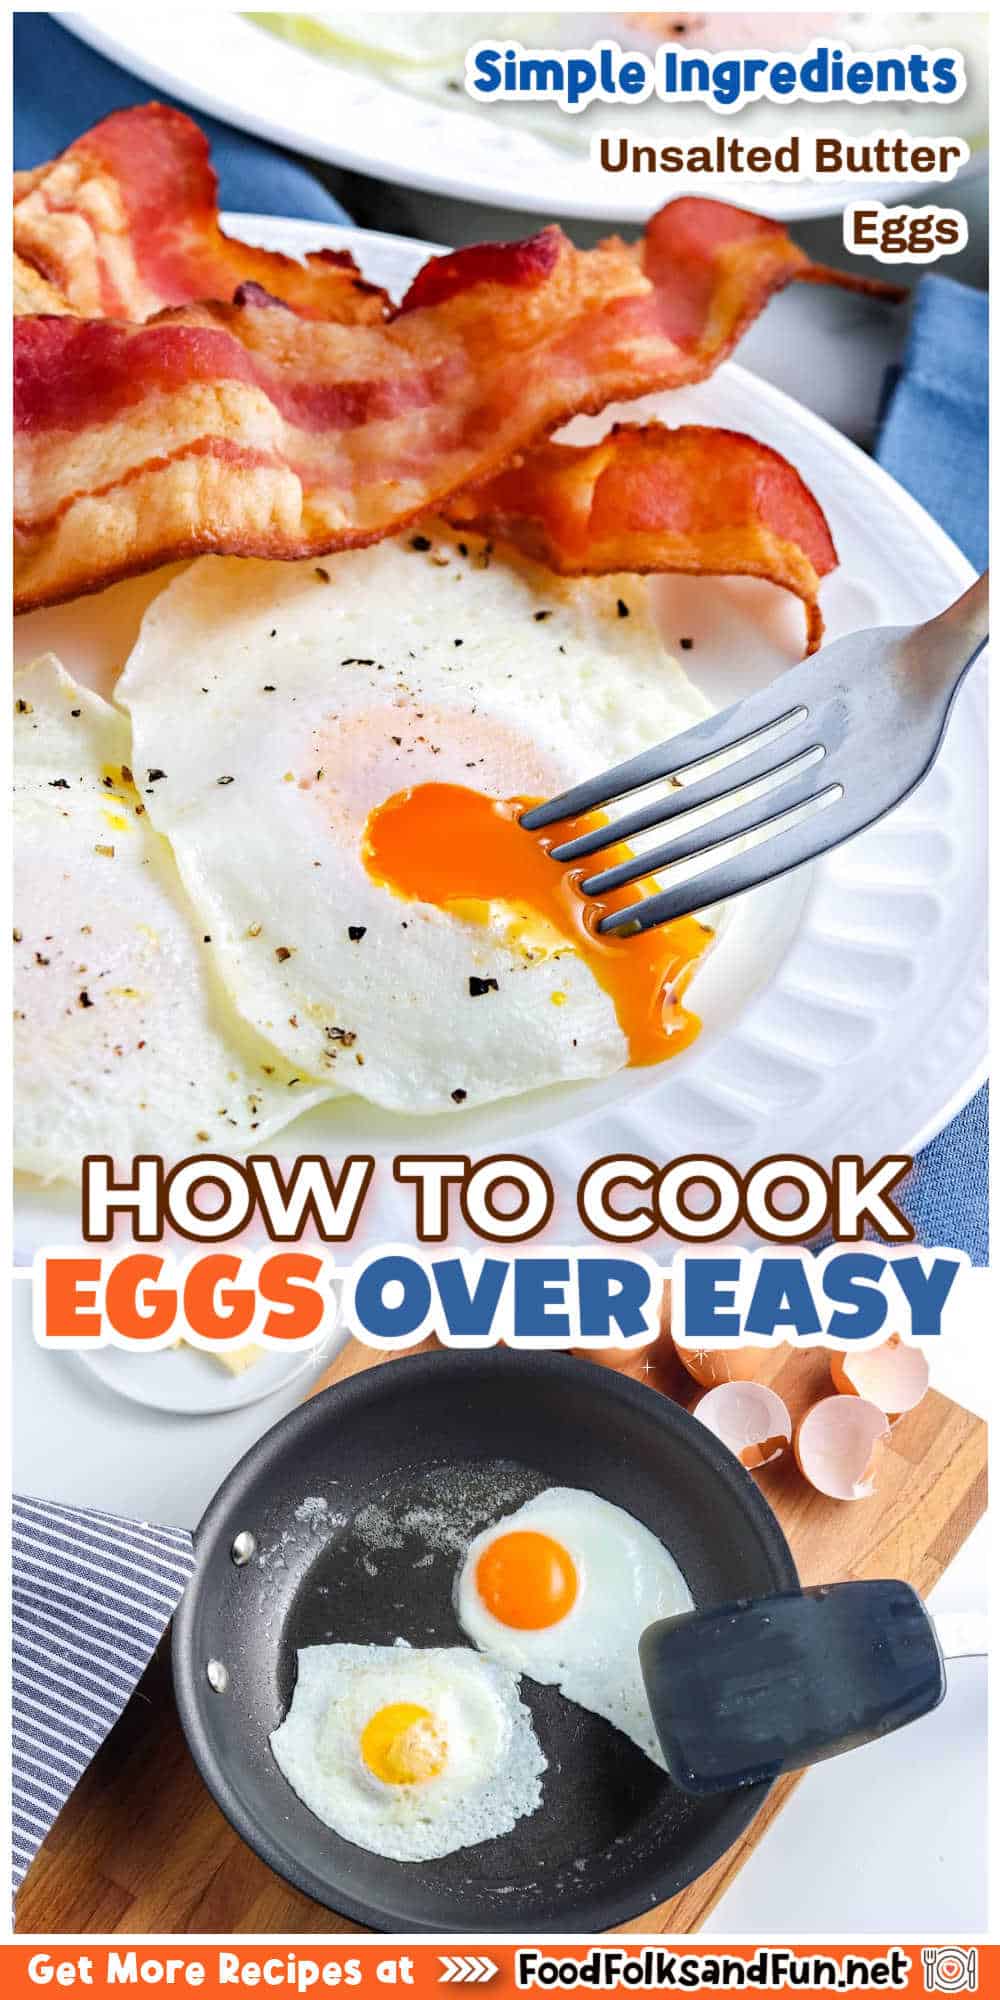 Making over easy eggs is just that, easy! All you need are eggs, butter, salt, and pepper. Making this breakfast classic takes just a few minutes when you follow this How To Make Over Easy Eggs tutorial. via @foodfolksandfun